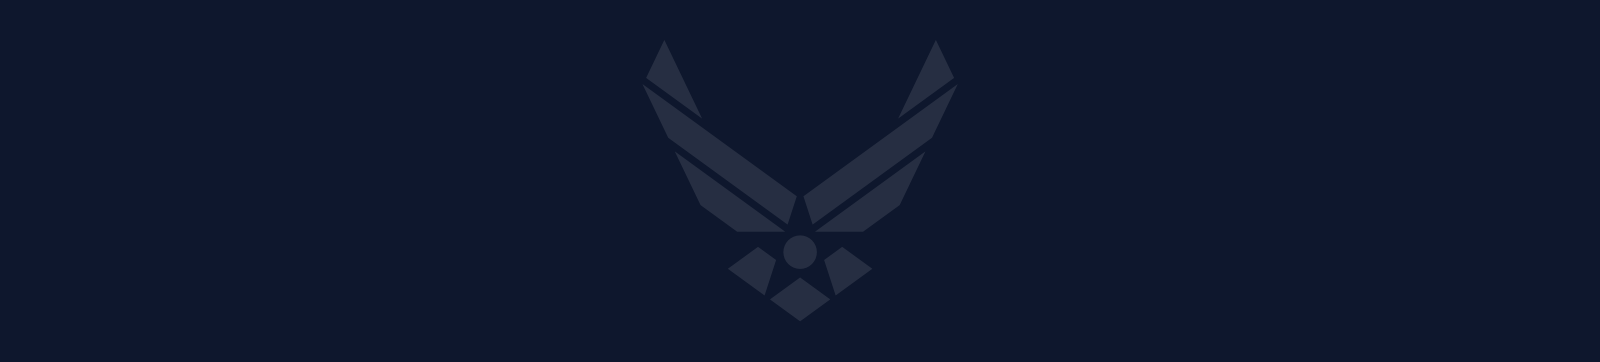 Dark Blue Background with Air Force Logo